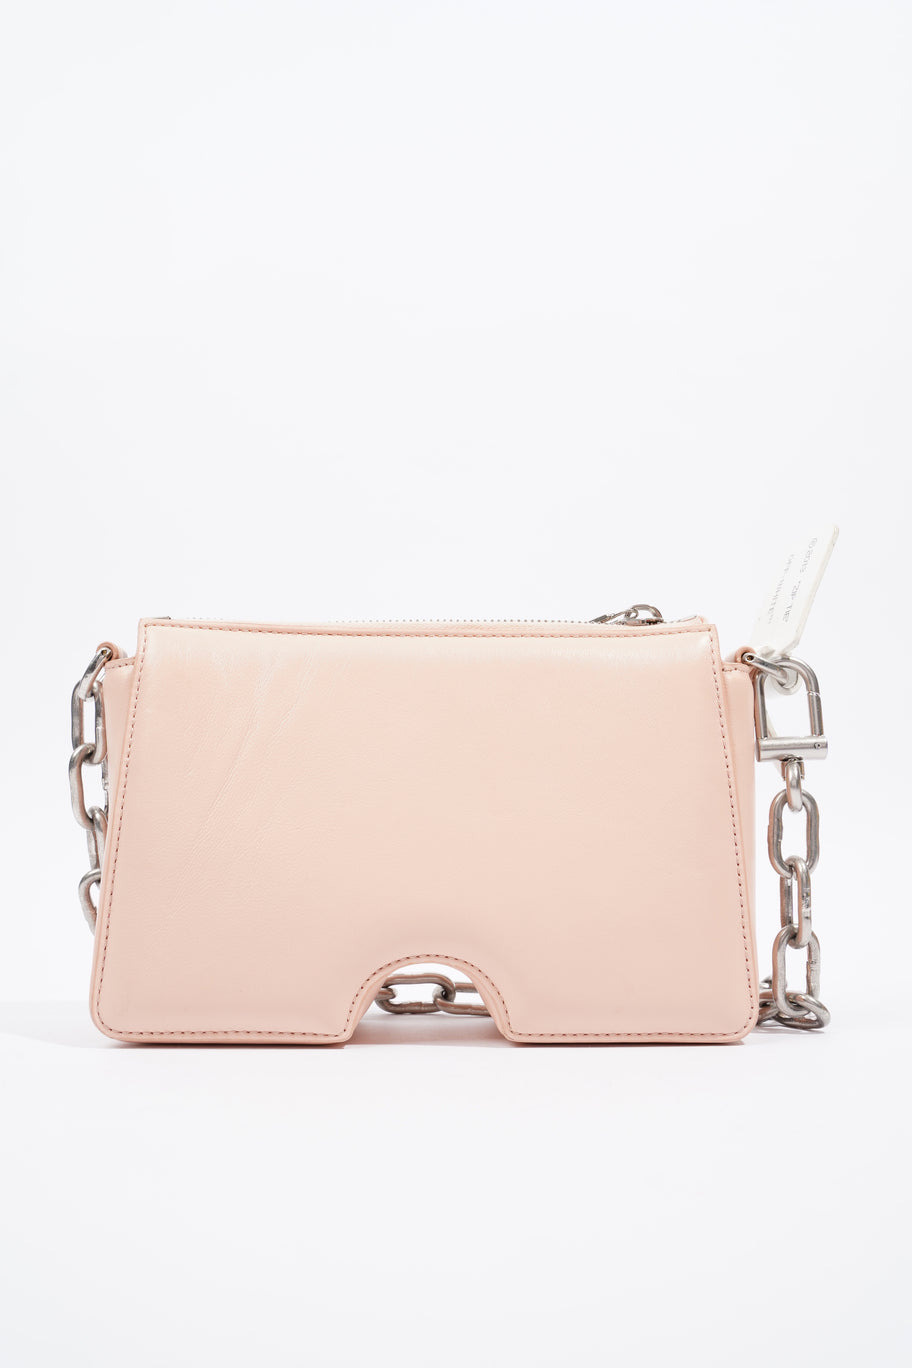 Burrow Zipped Pouch 20 Baby Pink Leather Image 4